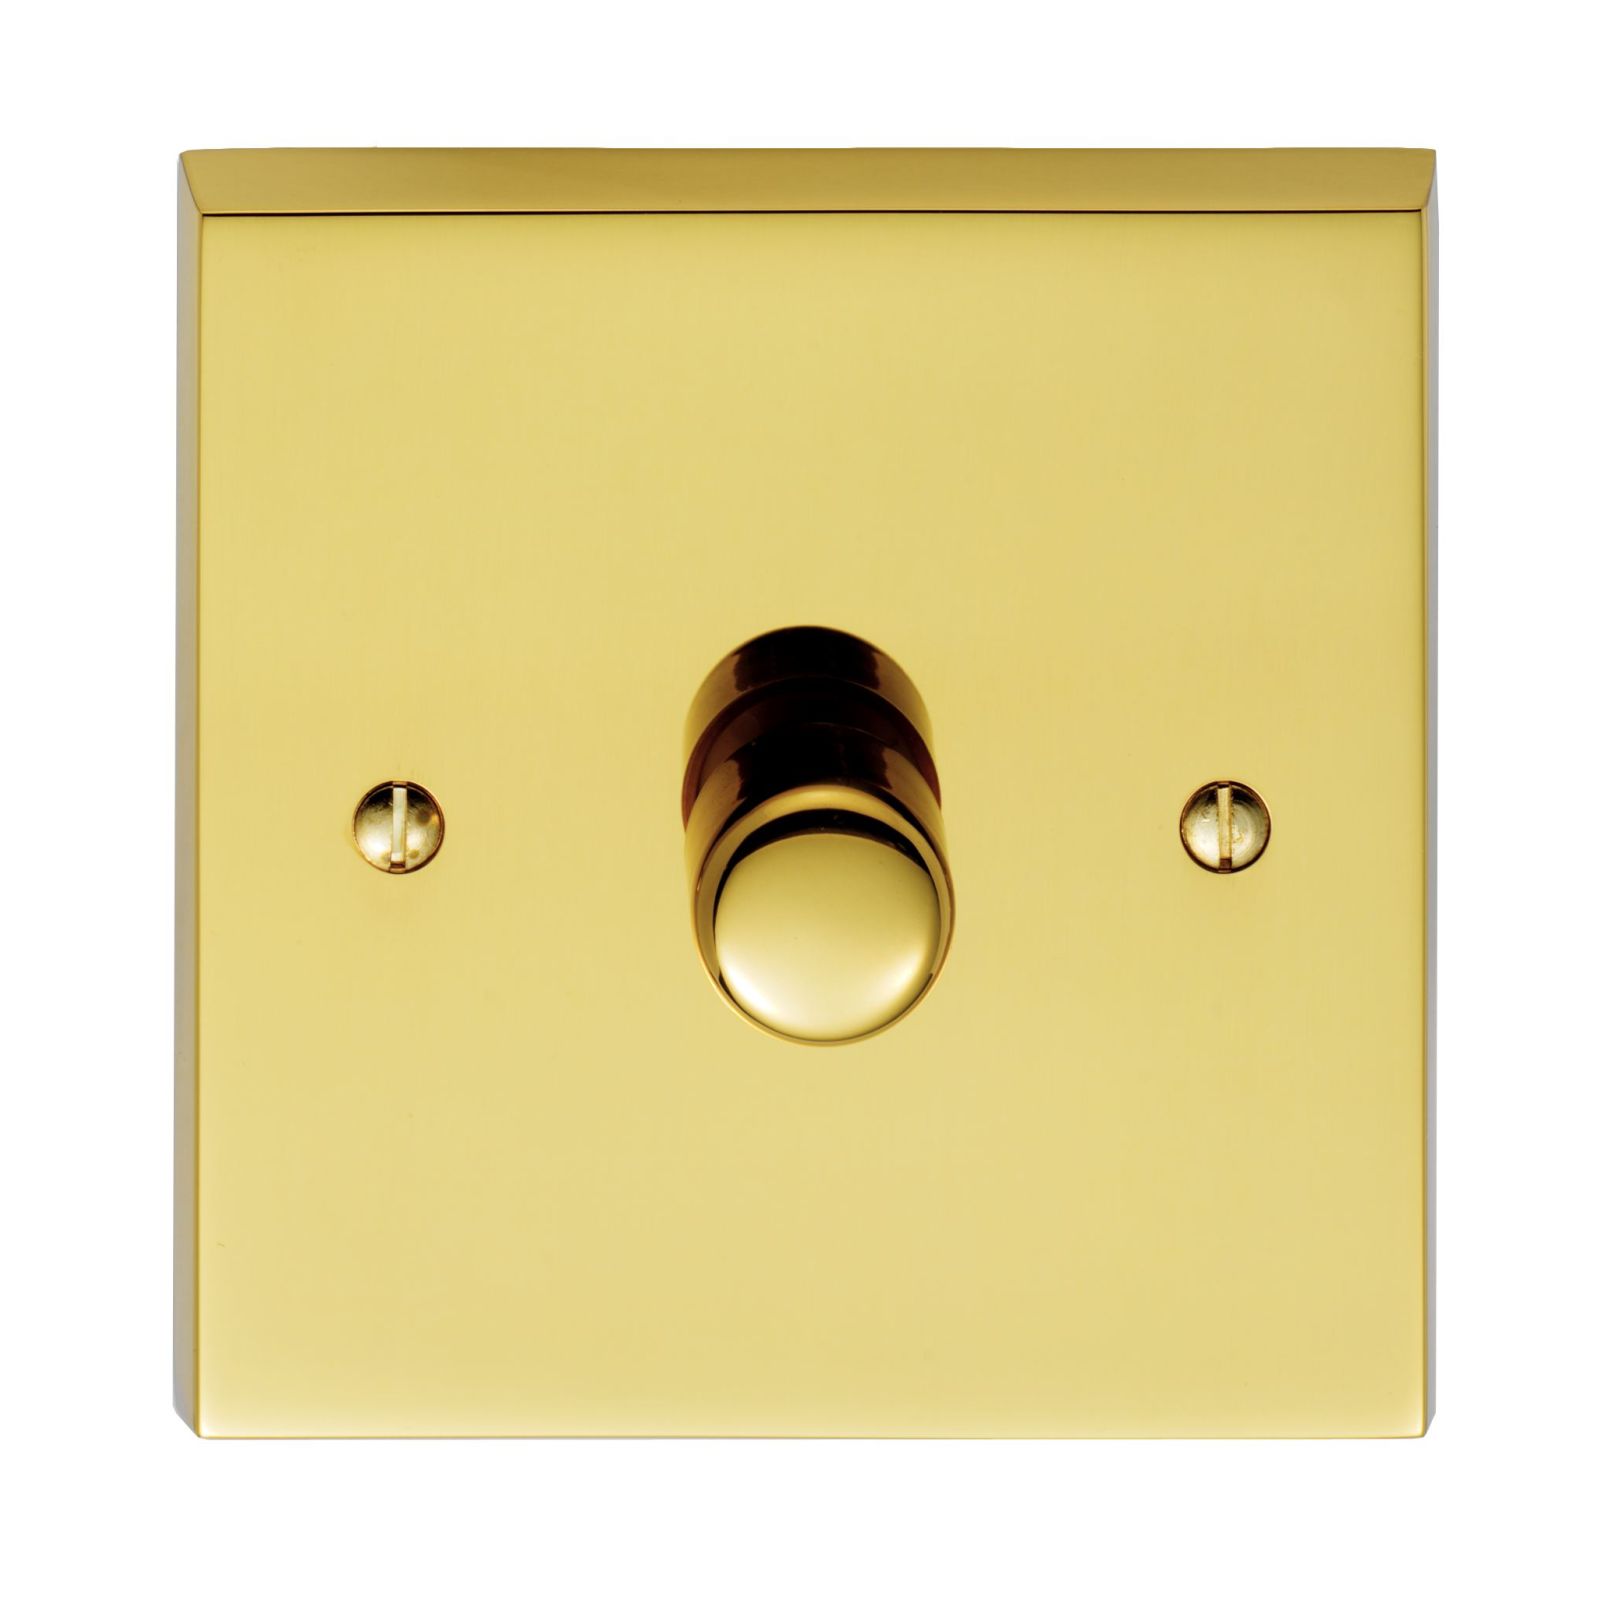 1 Gang 800w Dimmer Switch - brass, chrome or satin chrome